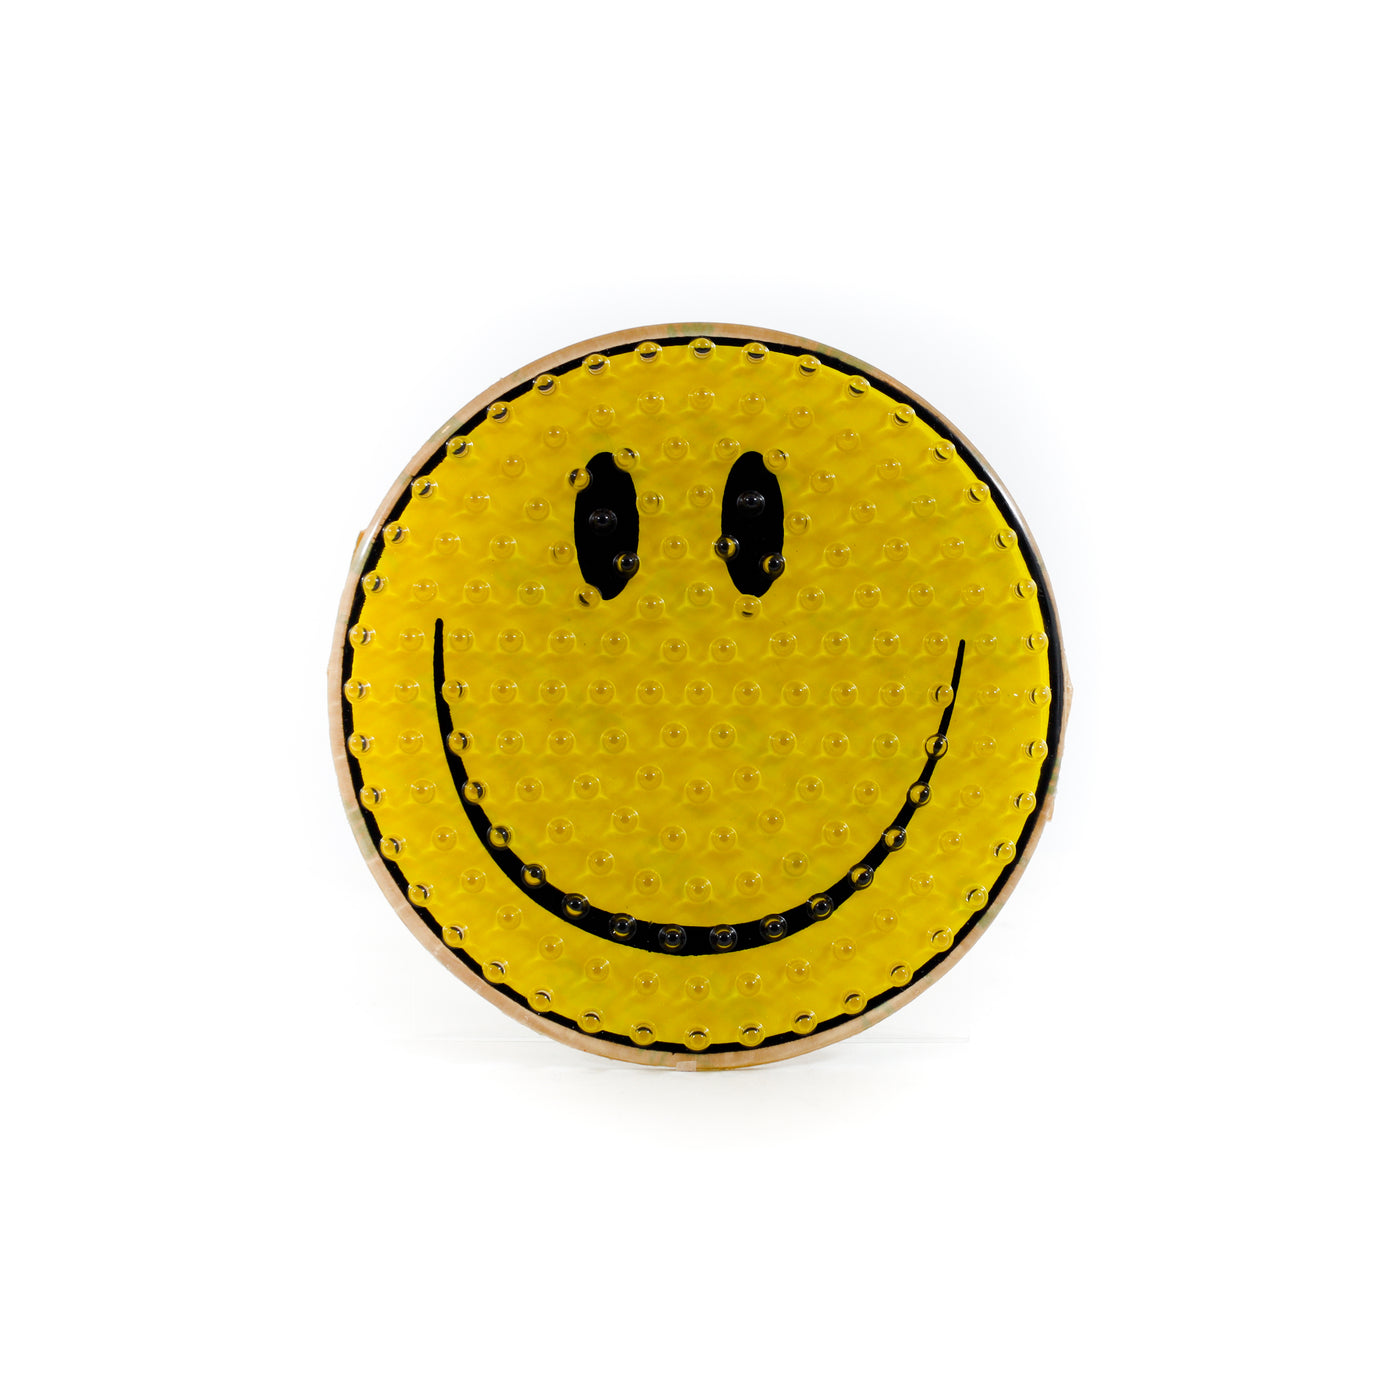 Smiley Face - Stomp Pad | Snowboard Traction Pad SNOWBOARD ACCESSORIES Sports Accessories America   